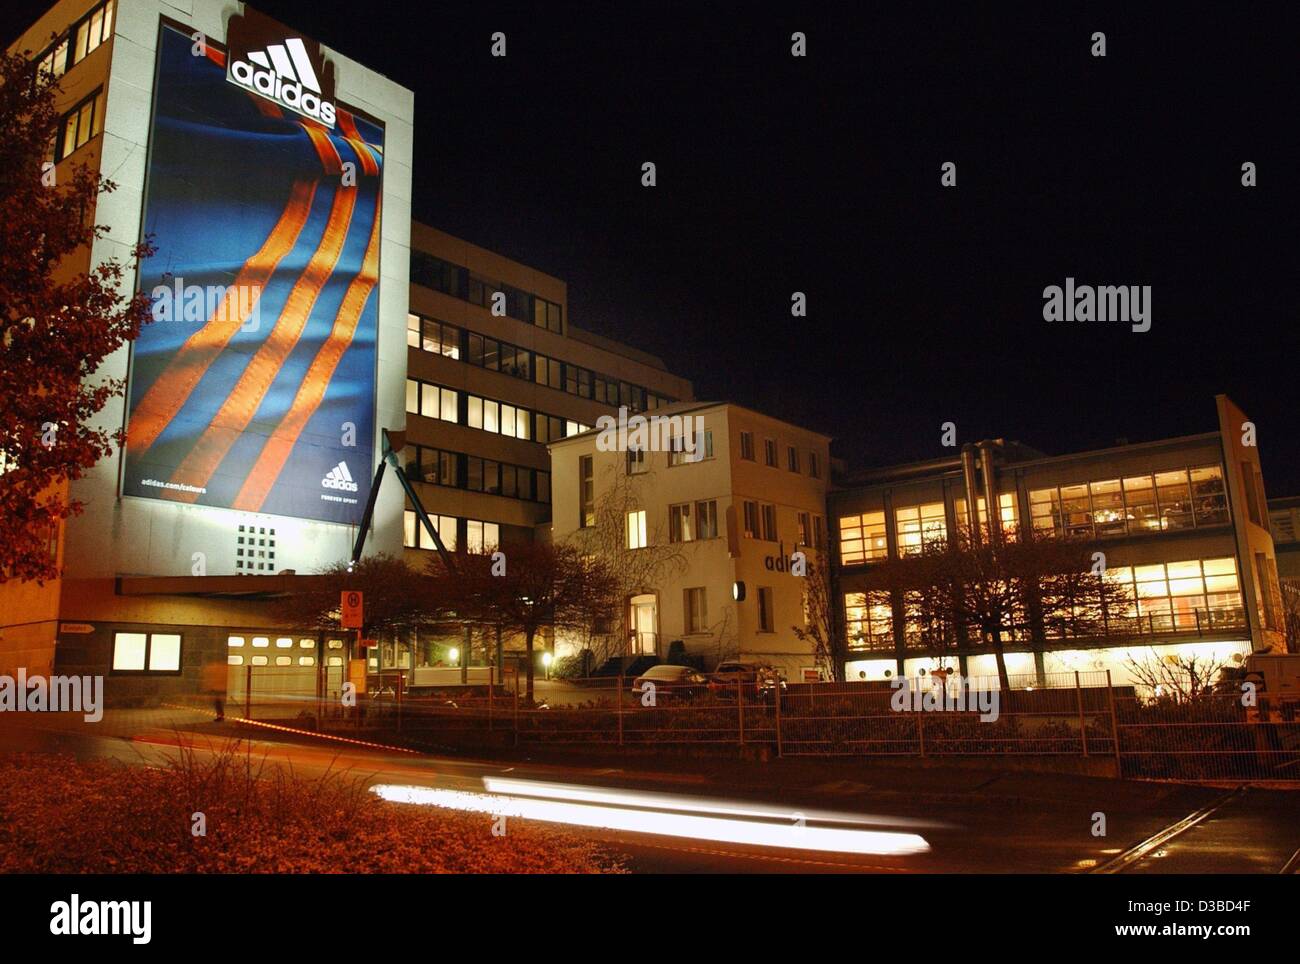 - The headquarters of the sports-goods company in Germany, 30 January 2003. The company on 30 January 2003 unveiled a lift in 2002 profit by 10 per cent